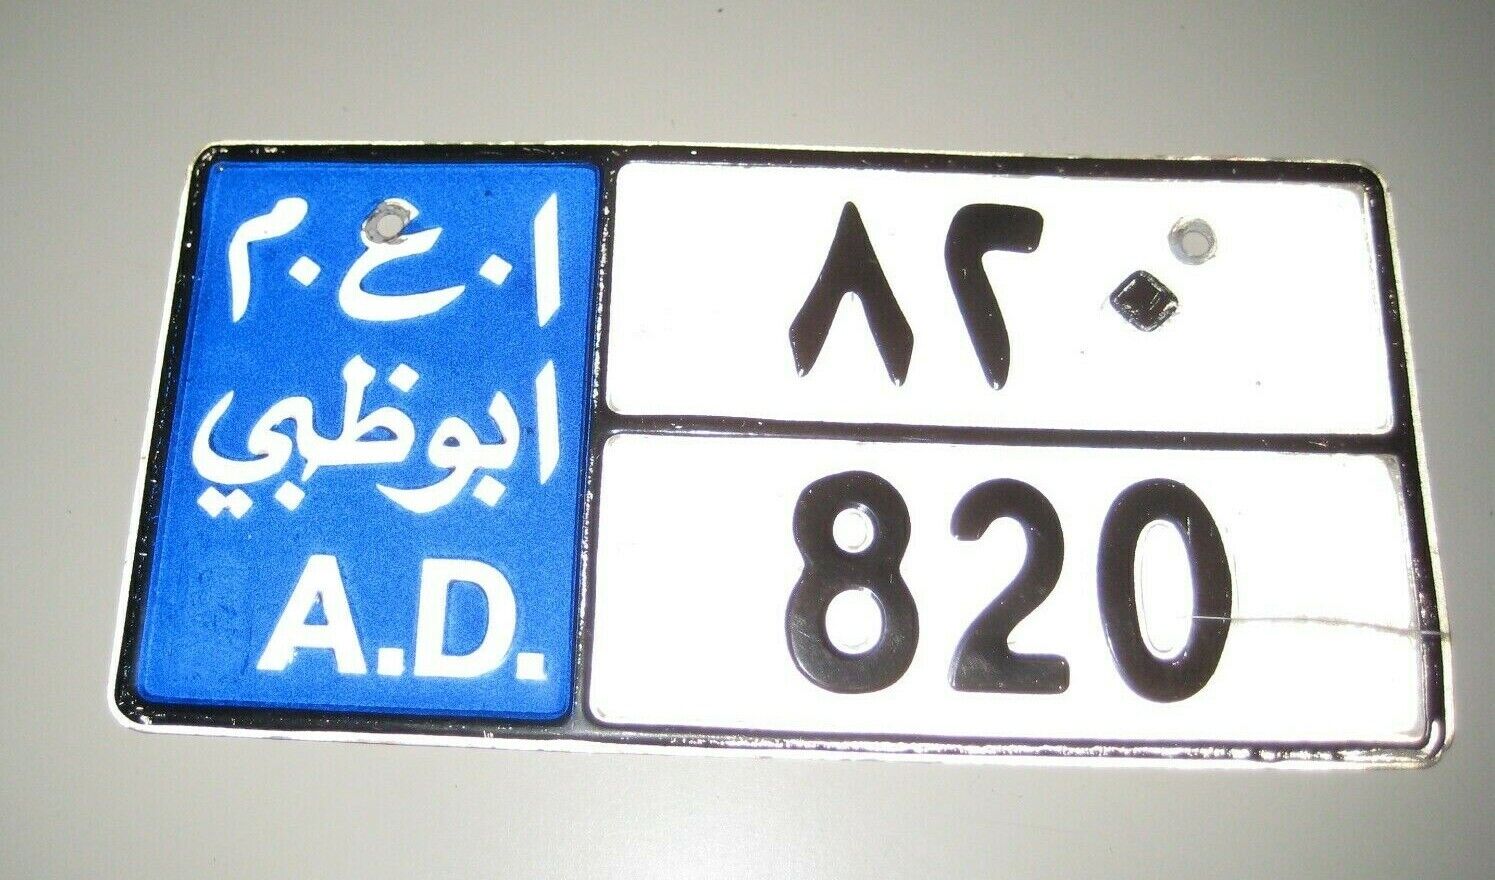 Original Abu Dhabi Middle East Emirates License Plate blue white low number